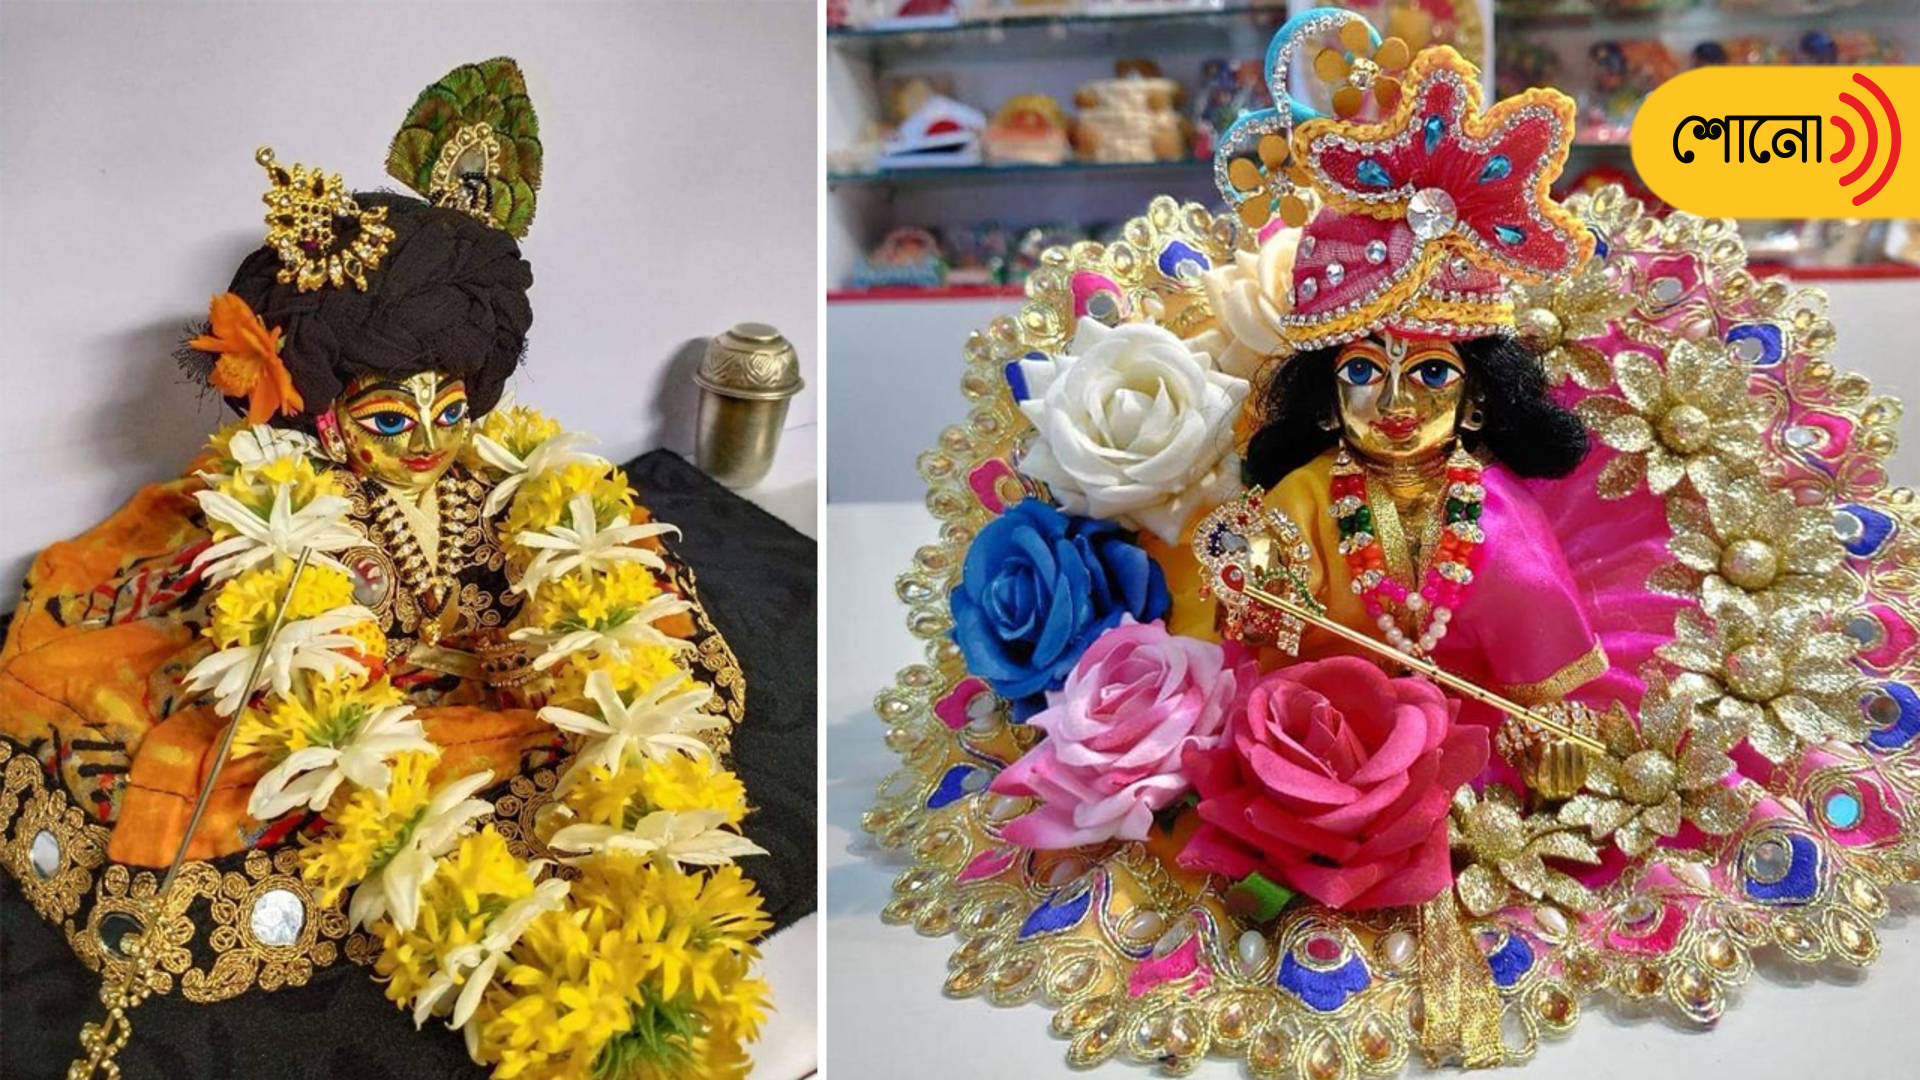 know more about the things that one must use to decorate room in Janmashtami